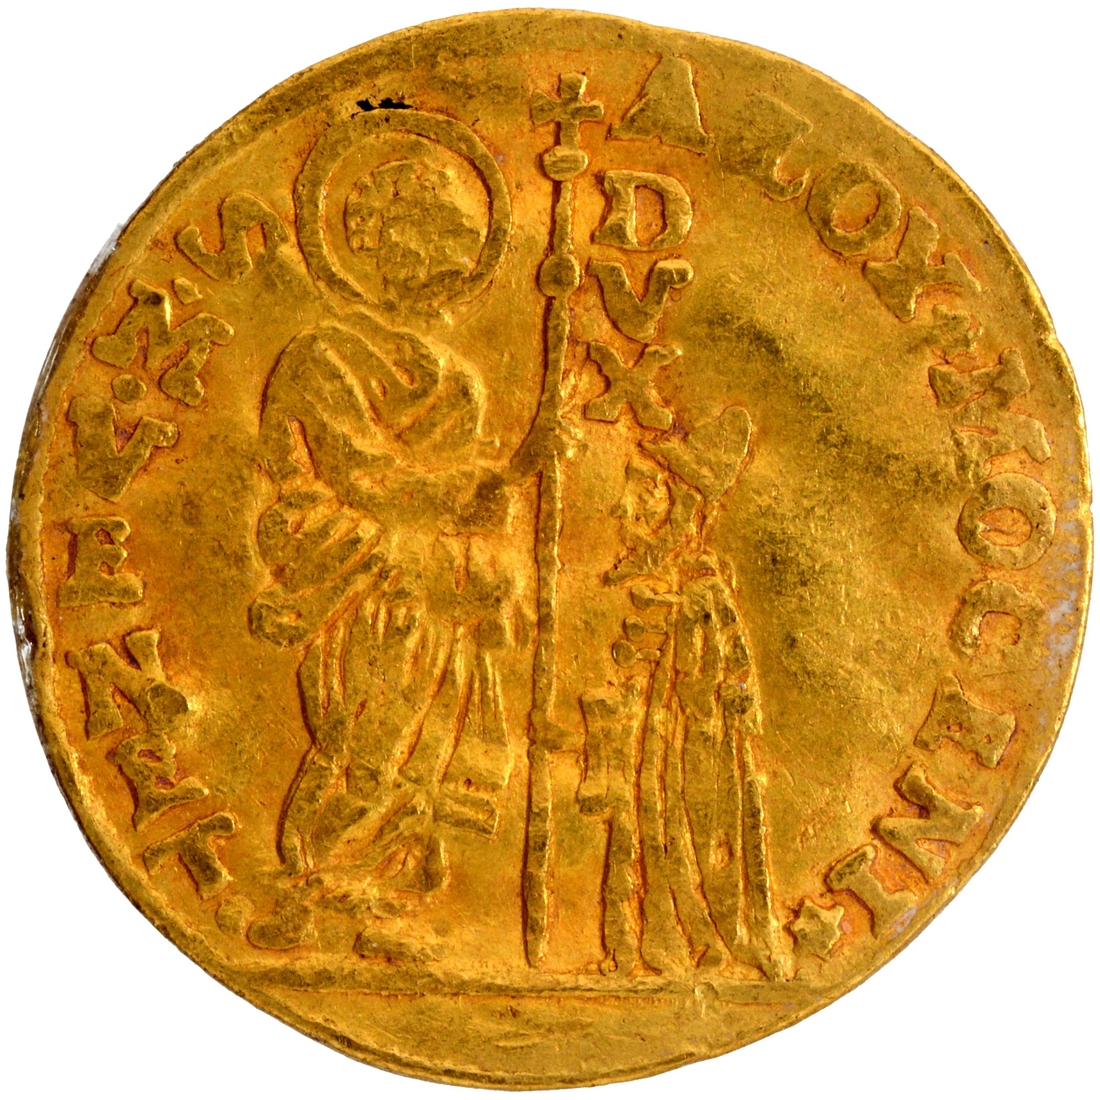 Gold One Zecchino Coin of Italy.